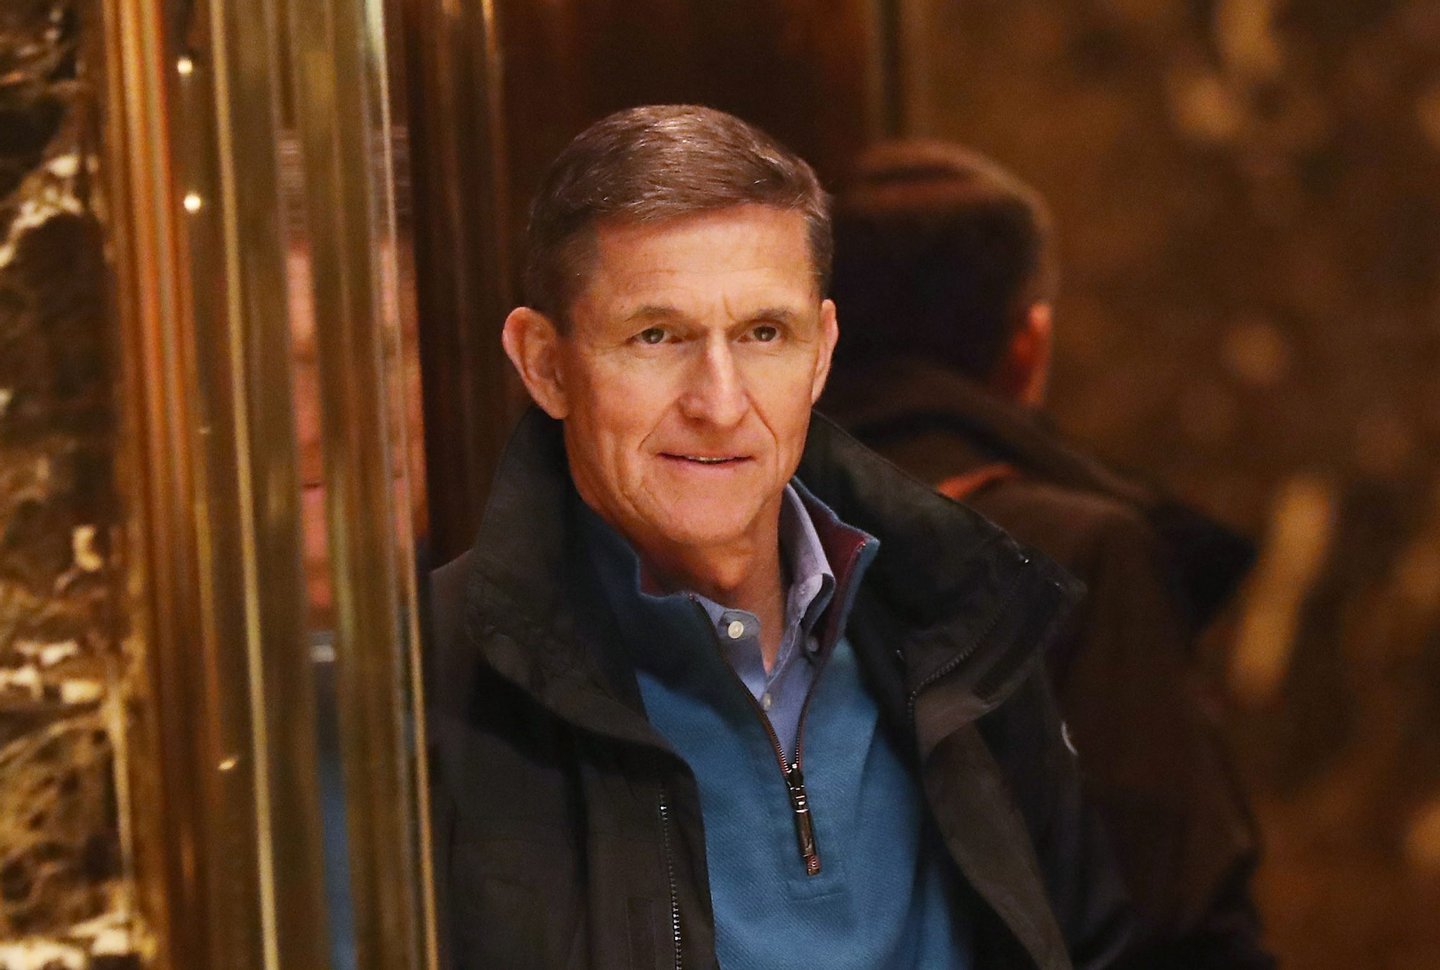 NEW YORK, NY - NOVEMBER 29: General Mike Flynn, Donald Trump's new national security adviser, arrives at Trump Tower on November 29, 2016 in New York City. President-elect Donald Trump and his transition team are in the process of filling cabinet and other high level positions for the new administration. (Photo by Spencer Platt/Getty Images)